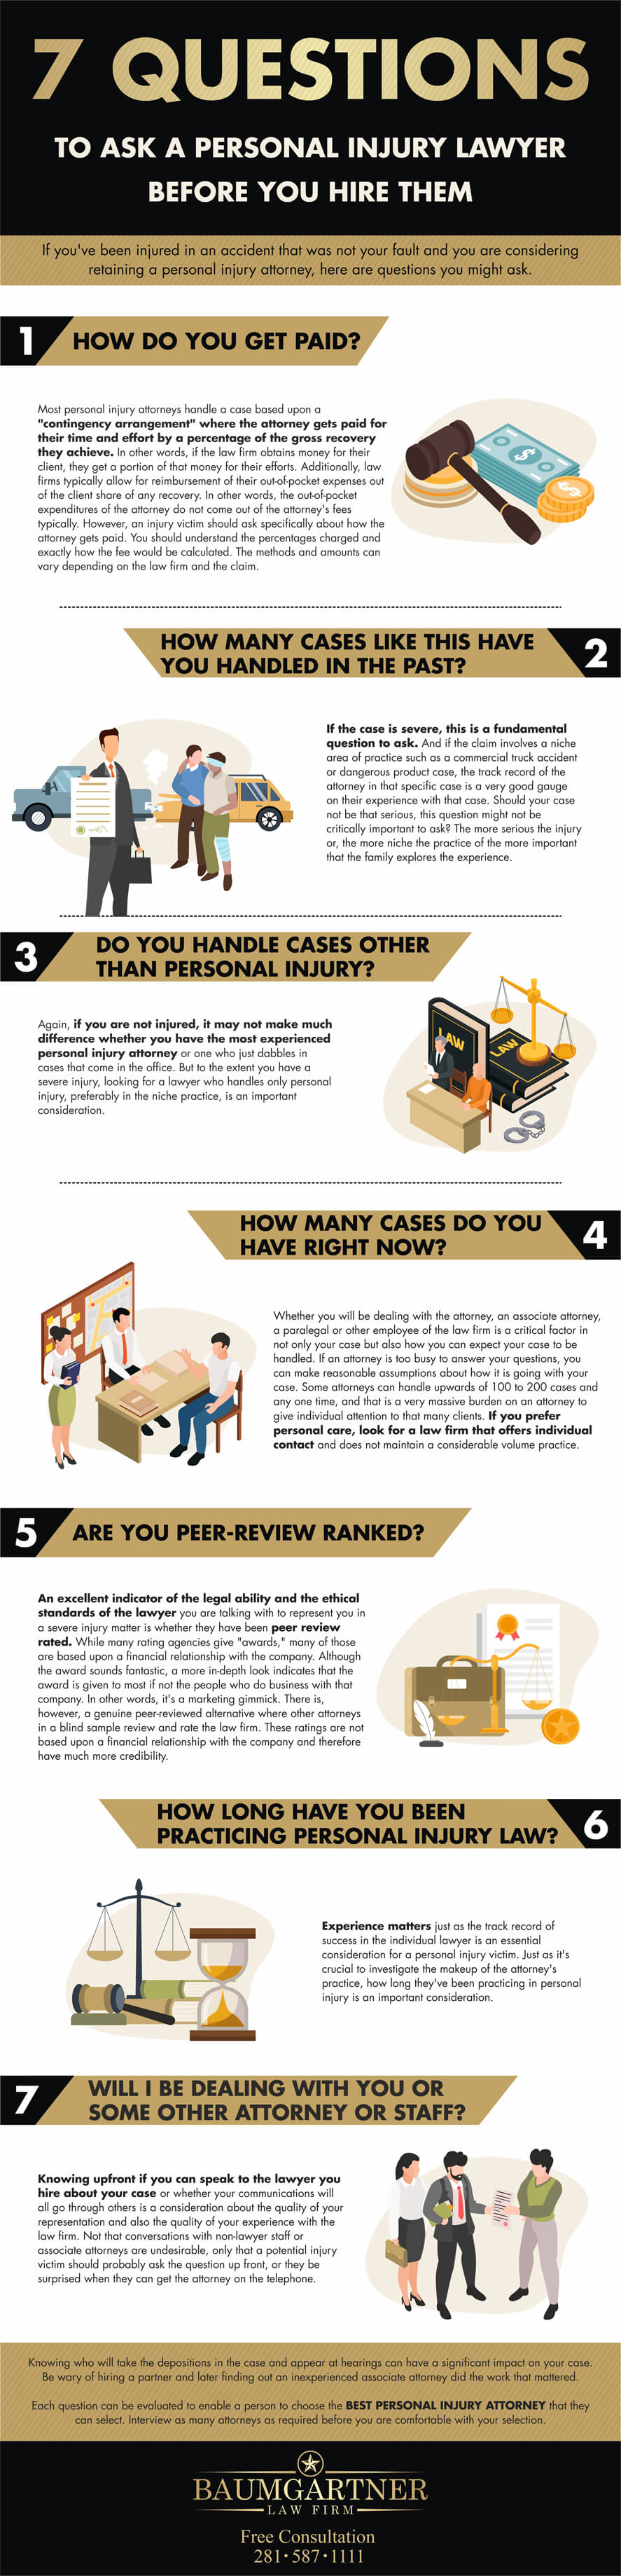 7-questions-before-hiring-lawyer-infographic